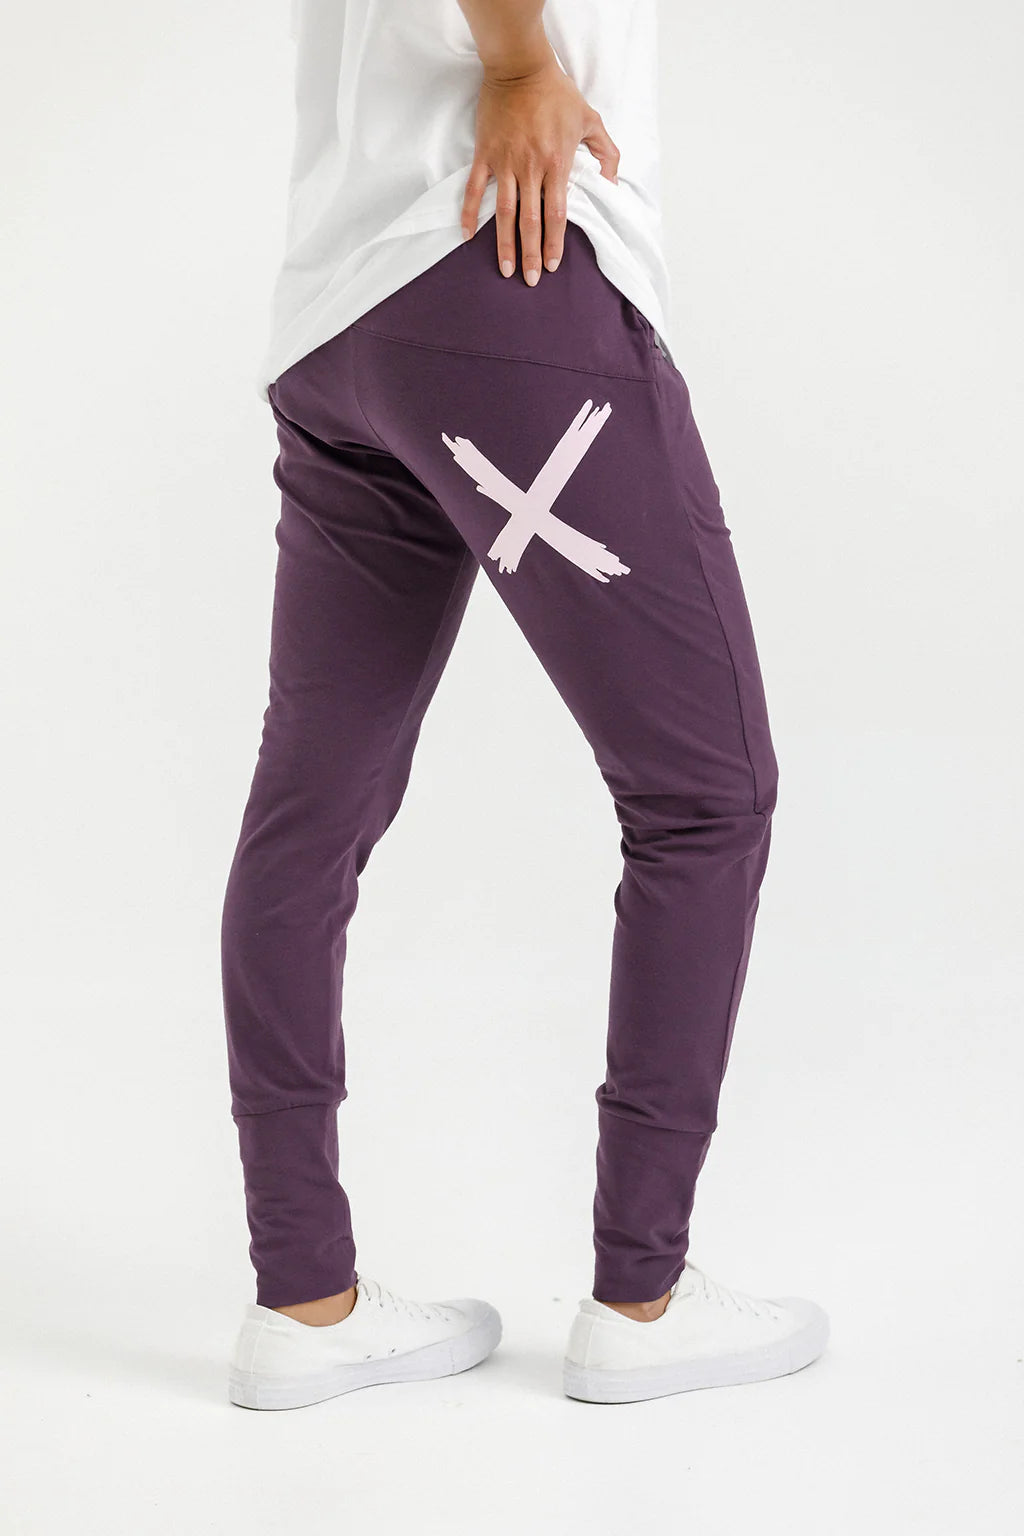 Homelee - Apartment Pants | Plum with Pastel Pink X